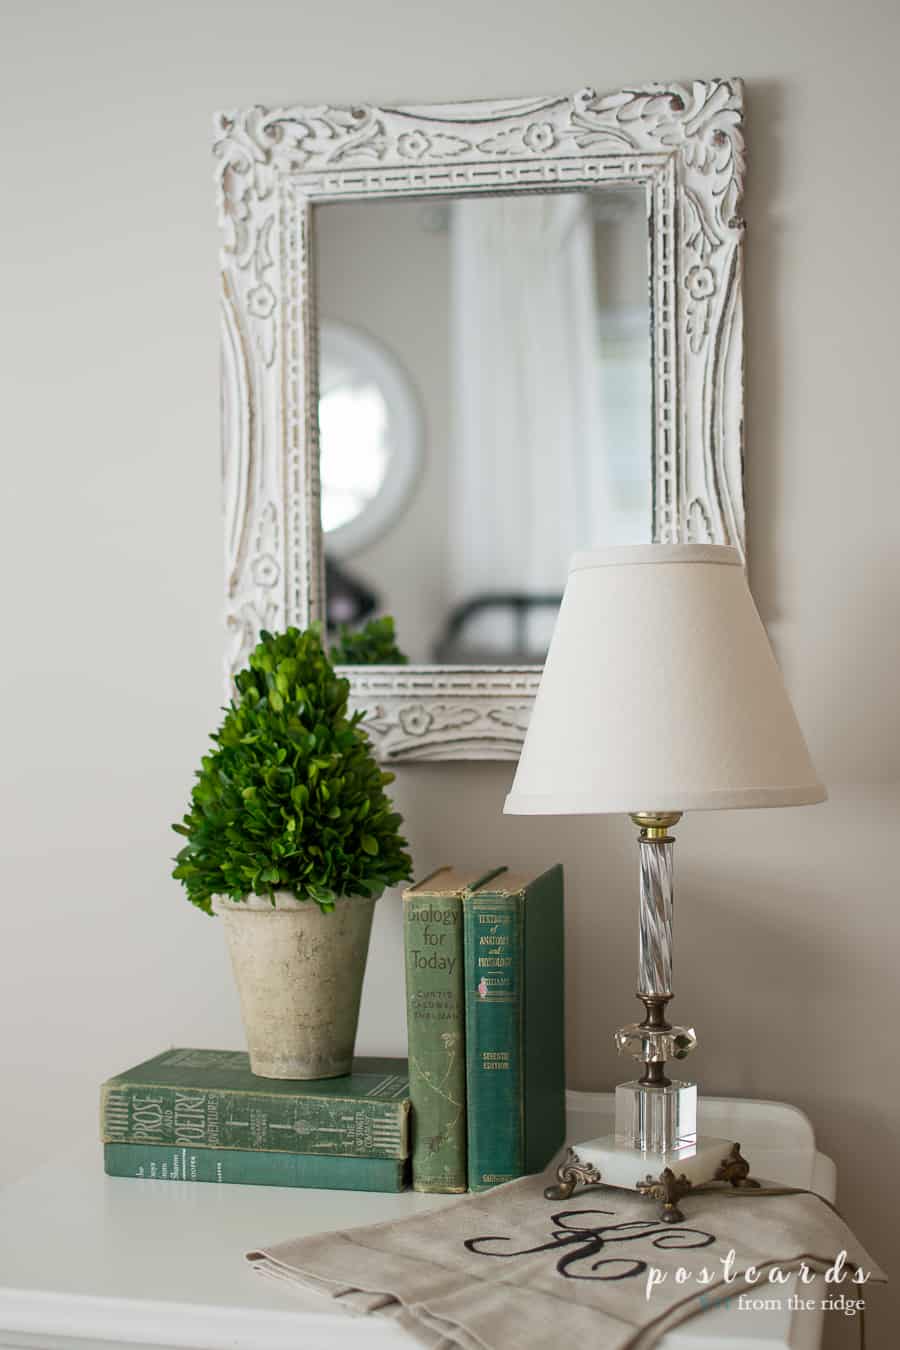 LOVE this vintage bedroom decor. Those old green books are gorgeous!